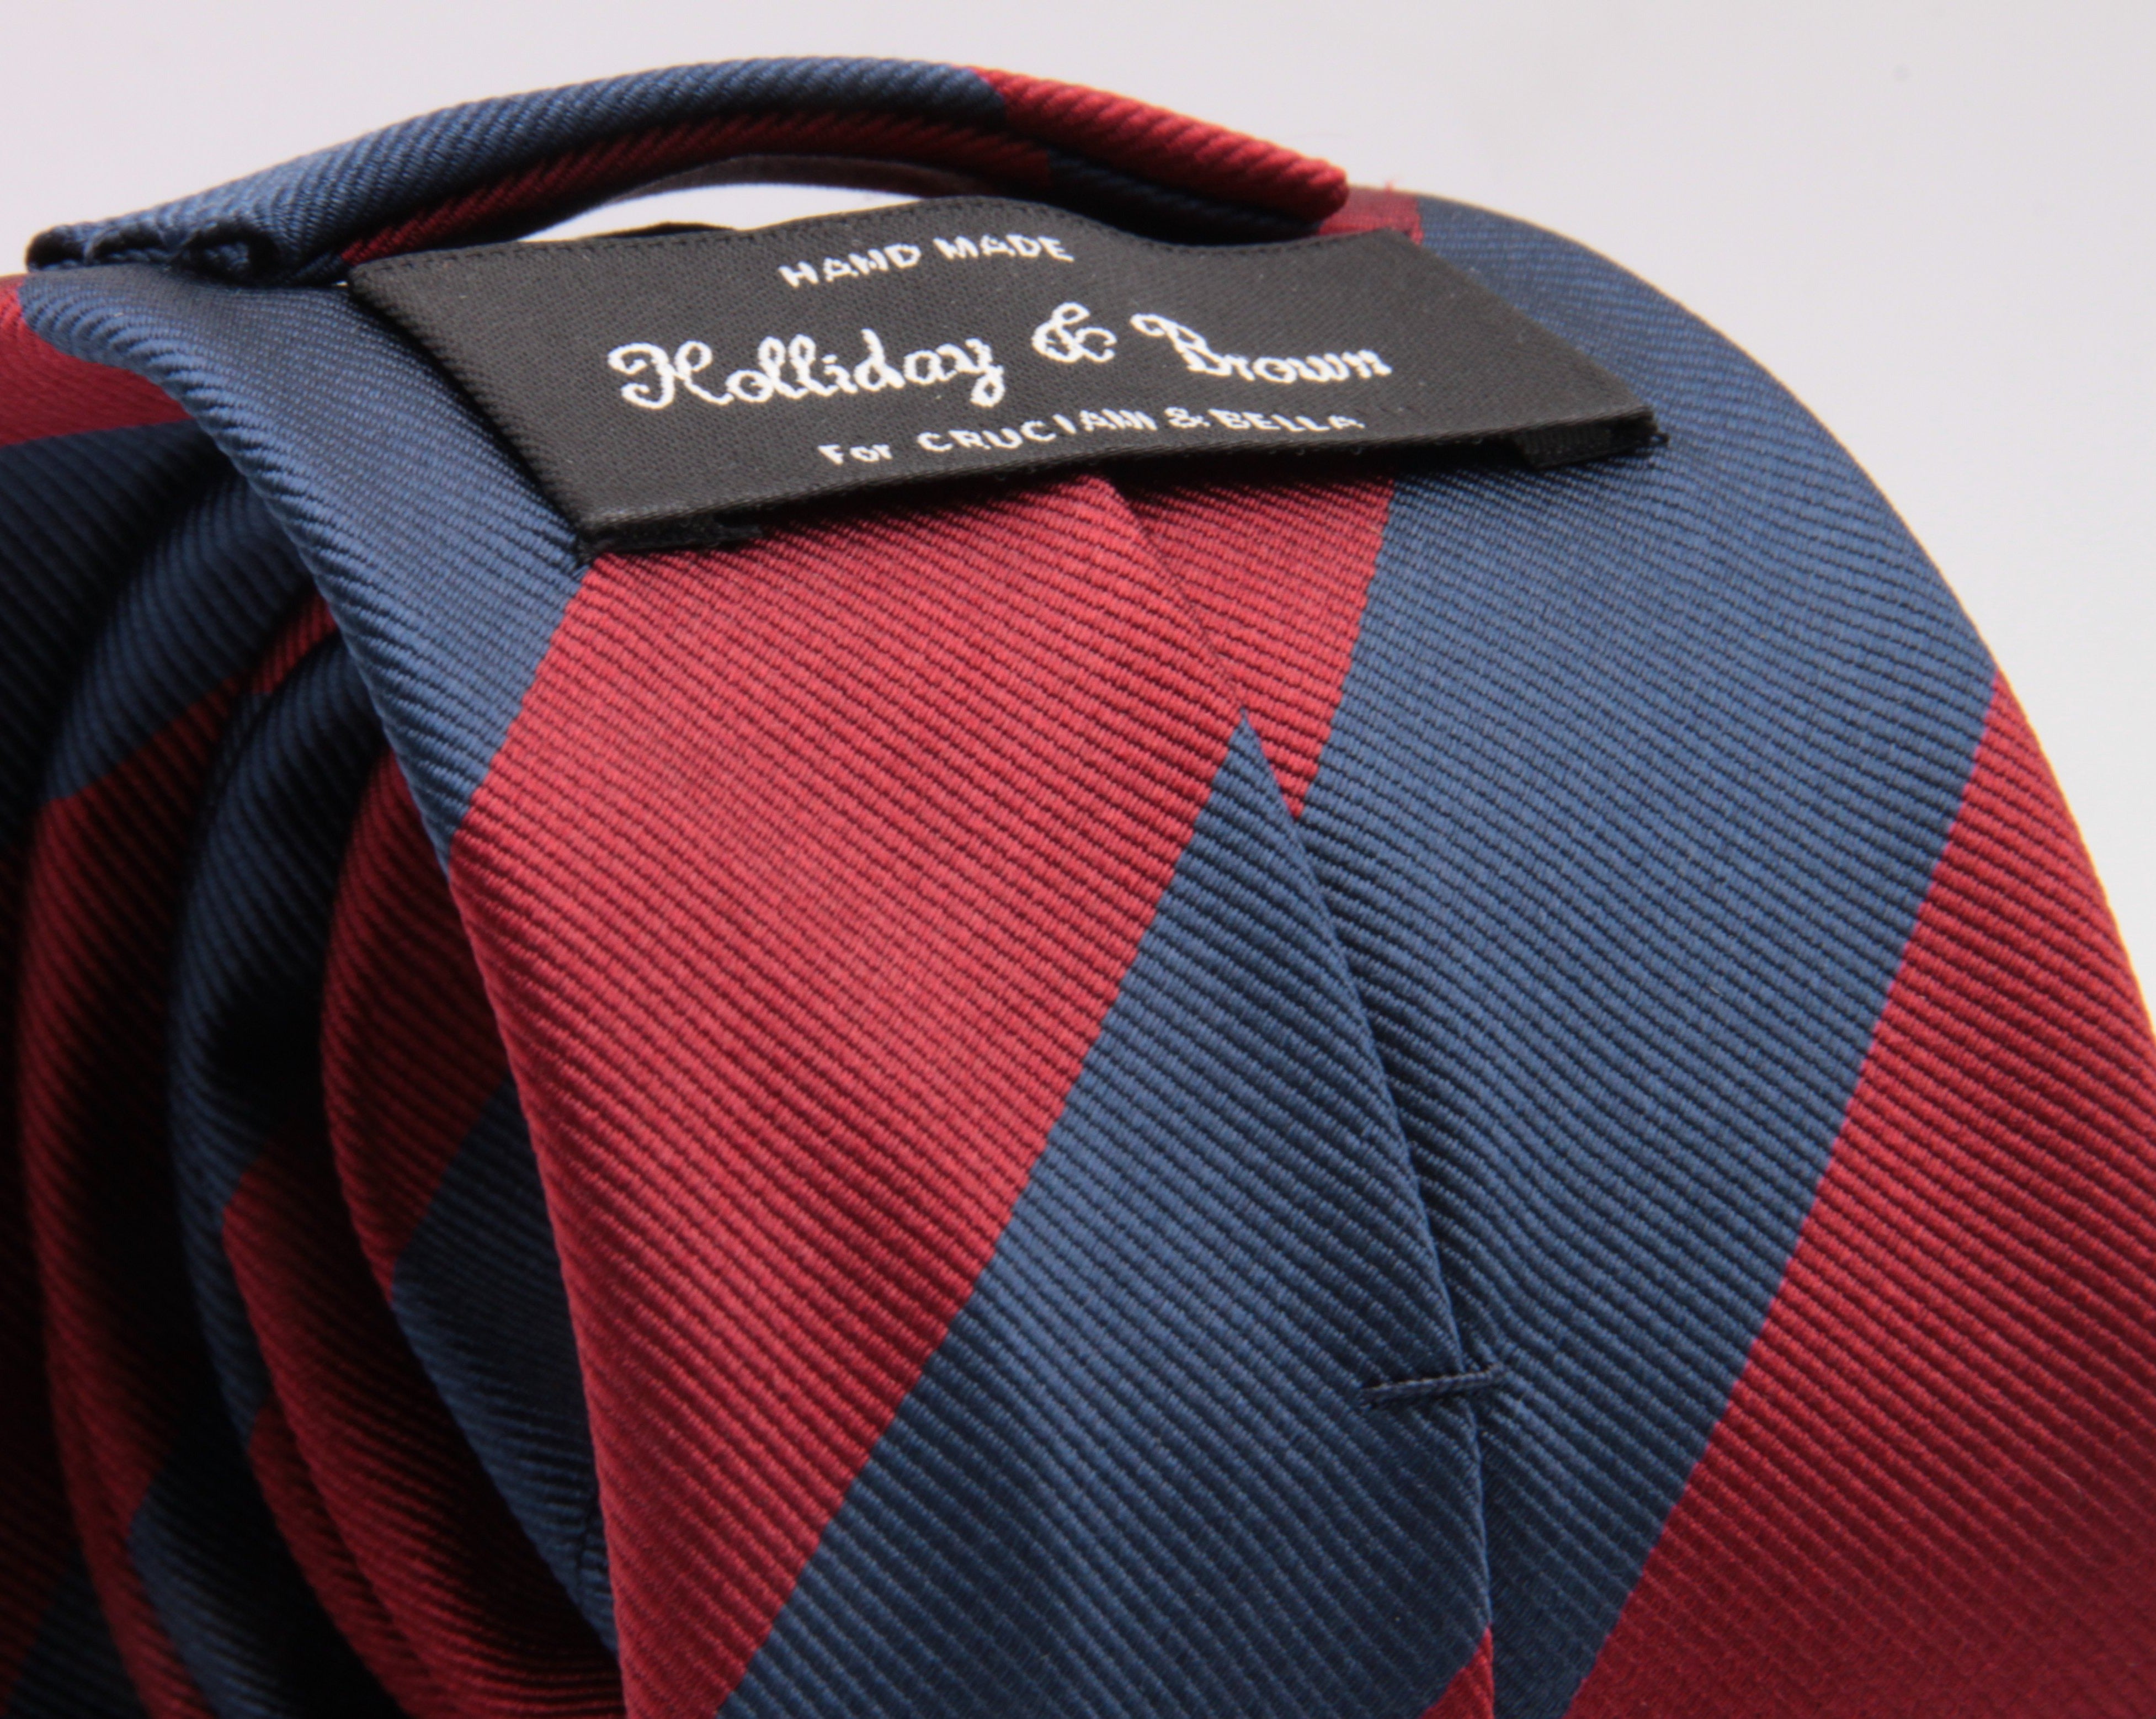 Holliday & Brown for Cruciani & Bella 100% Silk Jacquard  Regimental "Sidney Sussex College" Blue and Red stripes tie Handmade in Italy 8 cm x 150 cm #5123